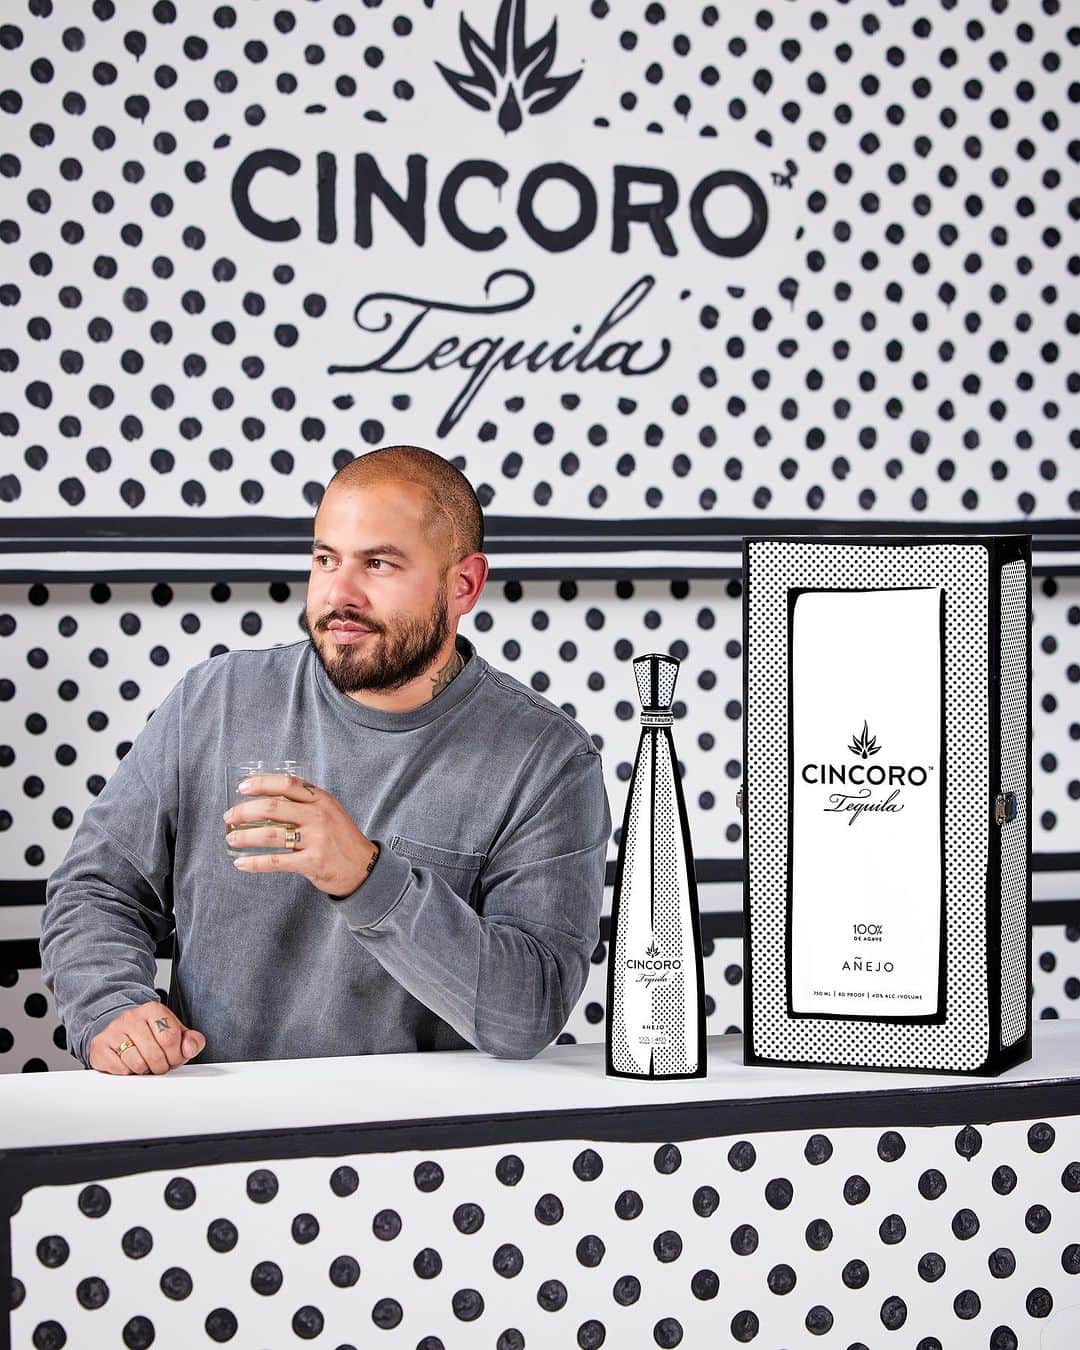 HYPEBEASTのインスタグラム：「Luxury spirits brand @Cincoro has surprised tequila lovers with a brand new collab for the holiday season. Teaming up with visual artist @JoshuaVides, Cincoro Tequila is introducing a reimagined design of its signature Cincoro Añejo Tequila bottle, complete with monochromatic graphics and a sleek packaging -- the bottle will be enclosed in a decorative wooden box to match the bottle's artistry. The exclusive Cincoro Tequila x Josh Vides bottle will be unveiled during a private event held at the Edition Hotel on December 5 during Miami Art Week. Head to the link in bio to discover more about the exclusive release. #sponsored」